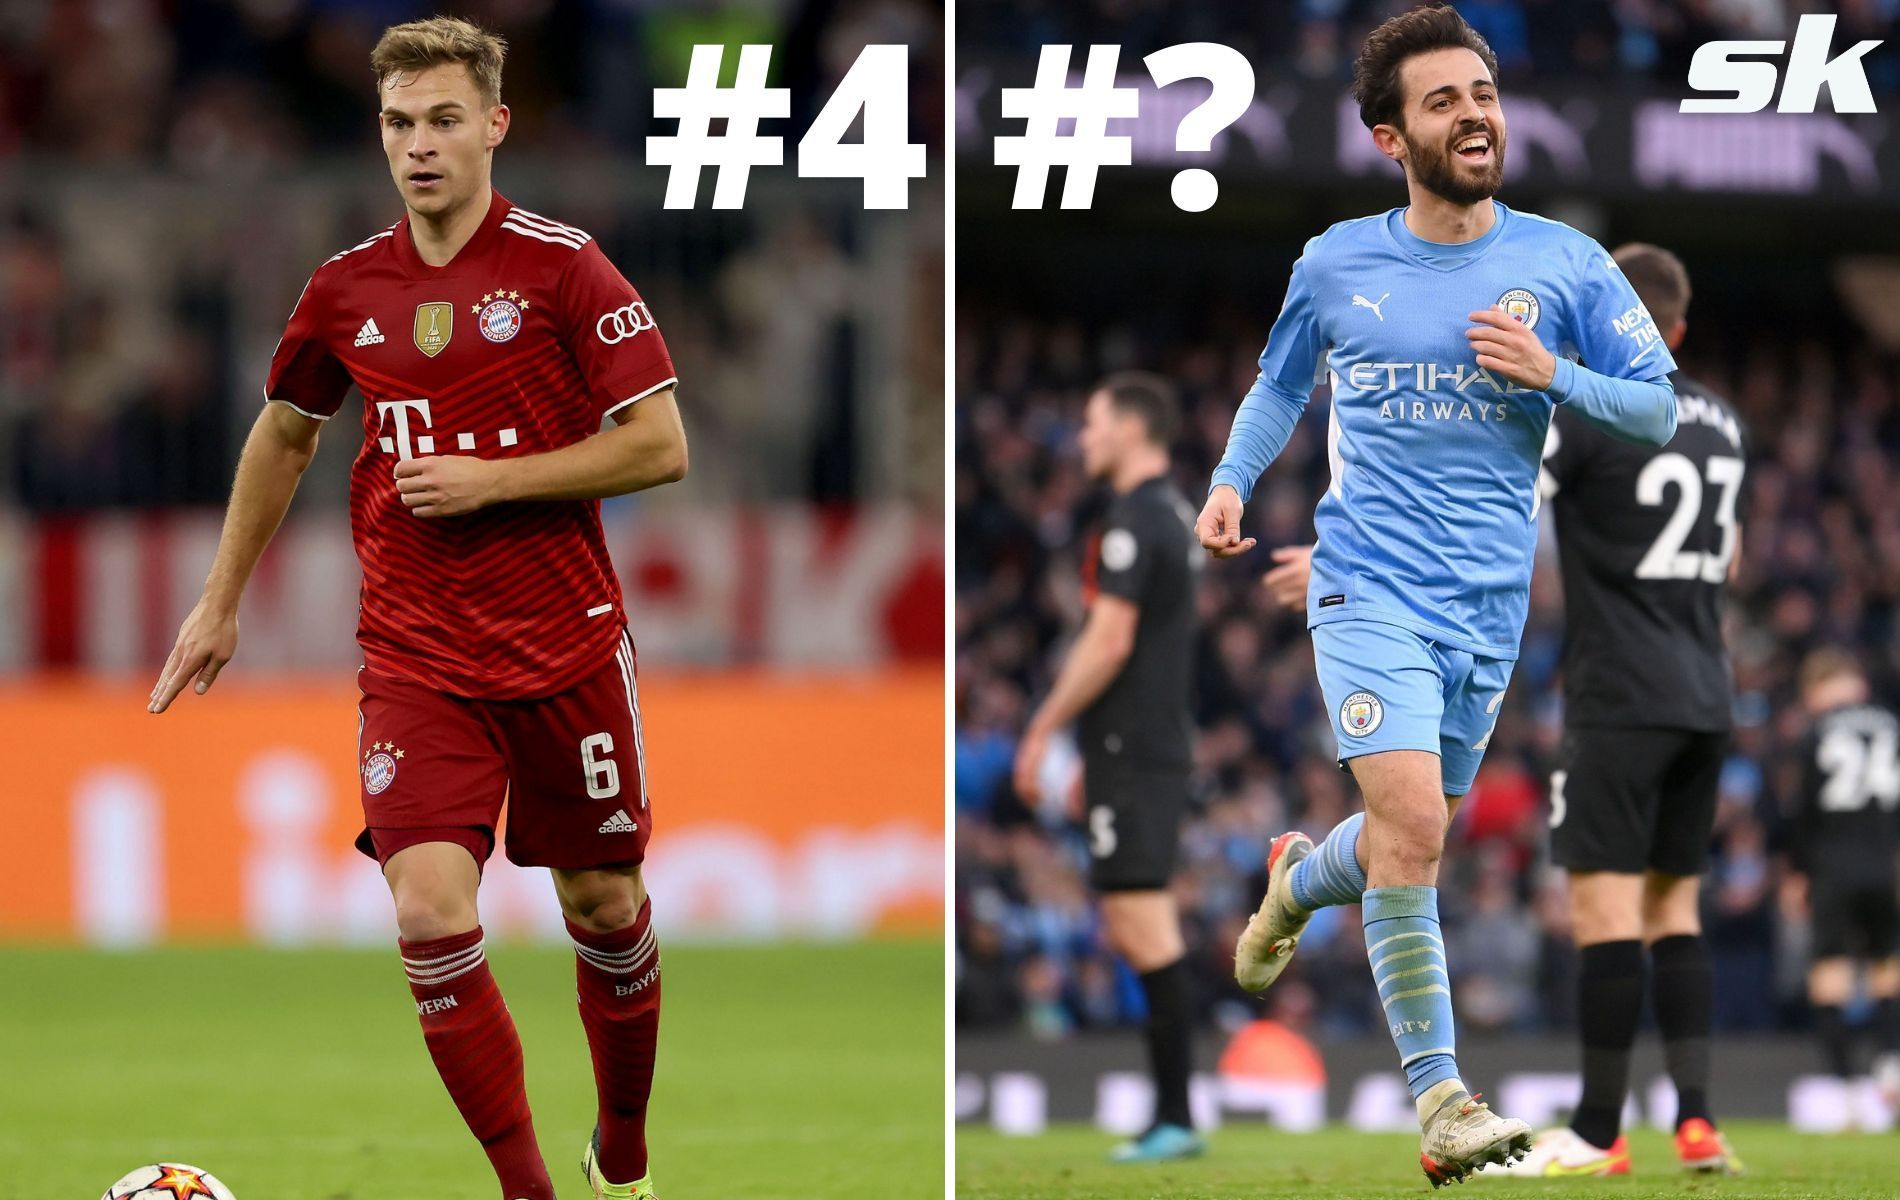 Who is the best ball-carrying midfielder in the world right now?